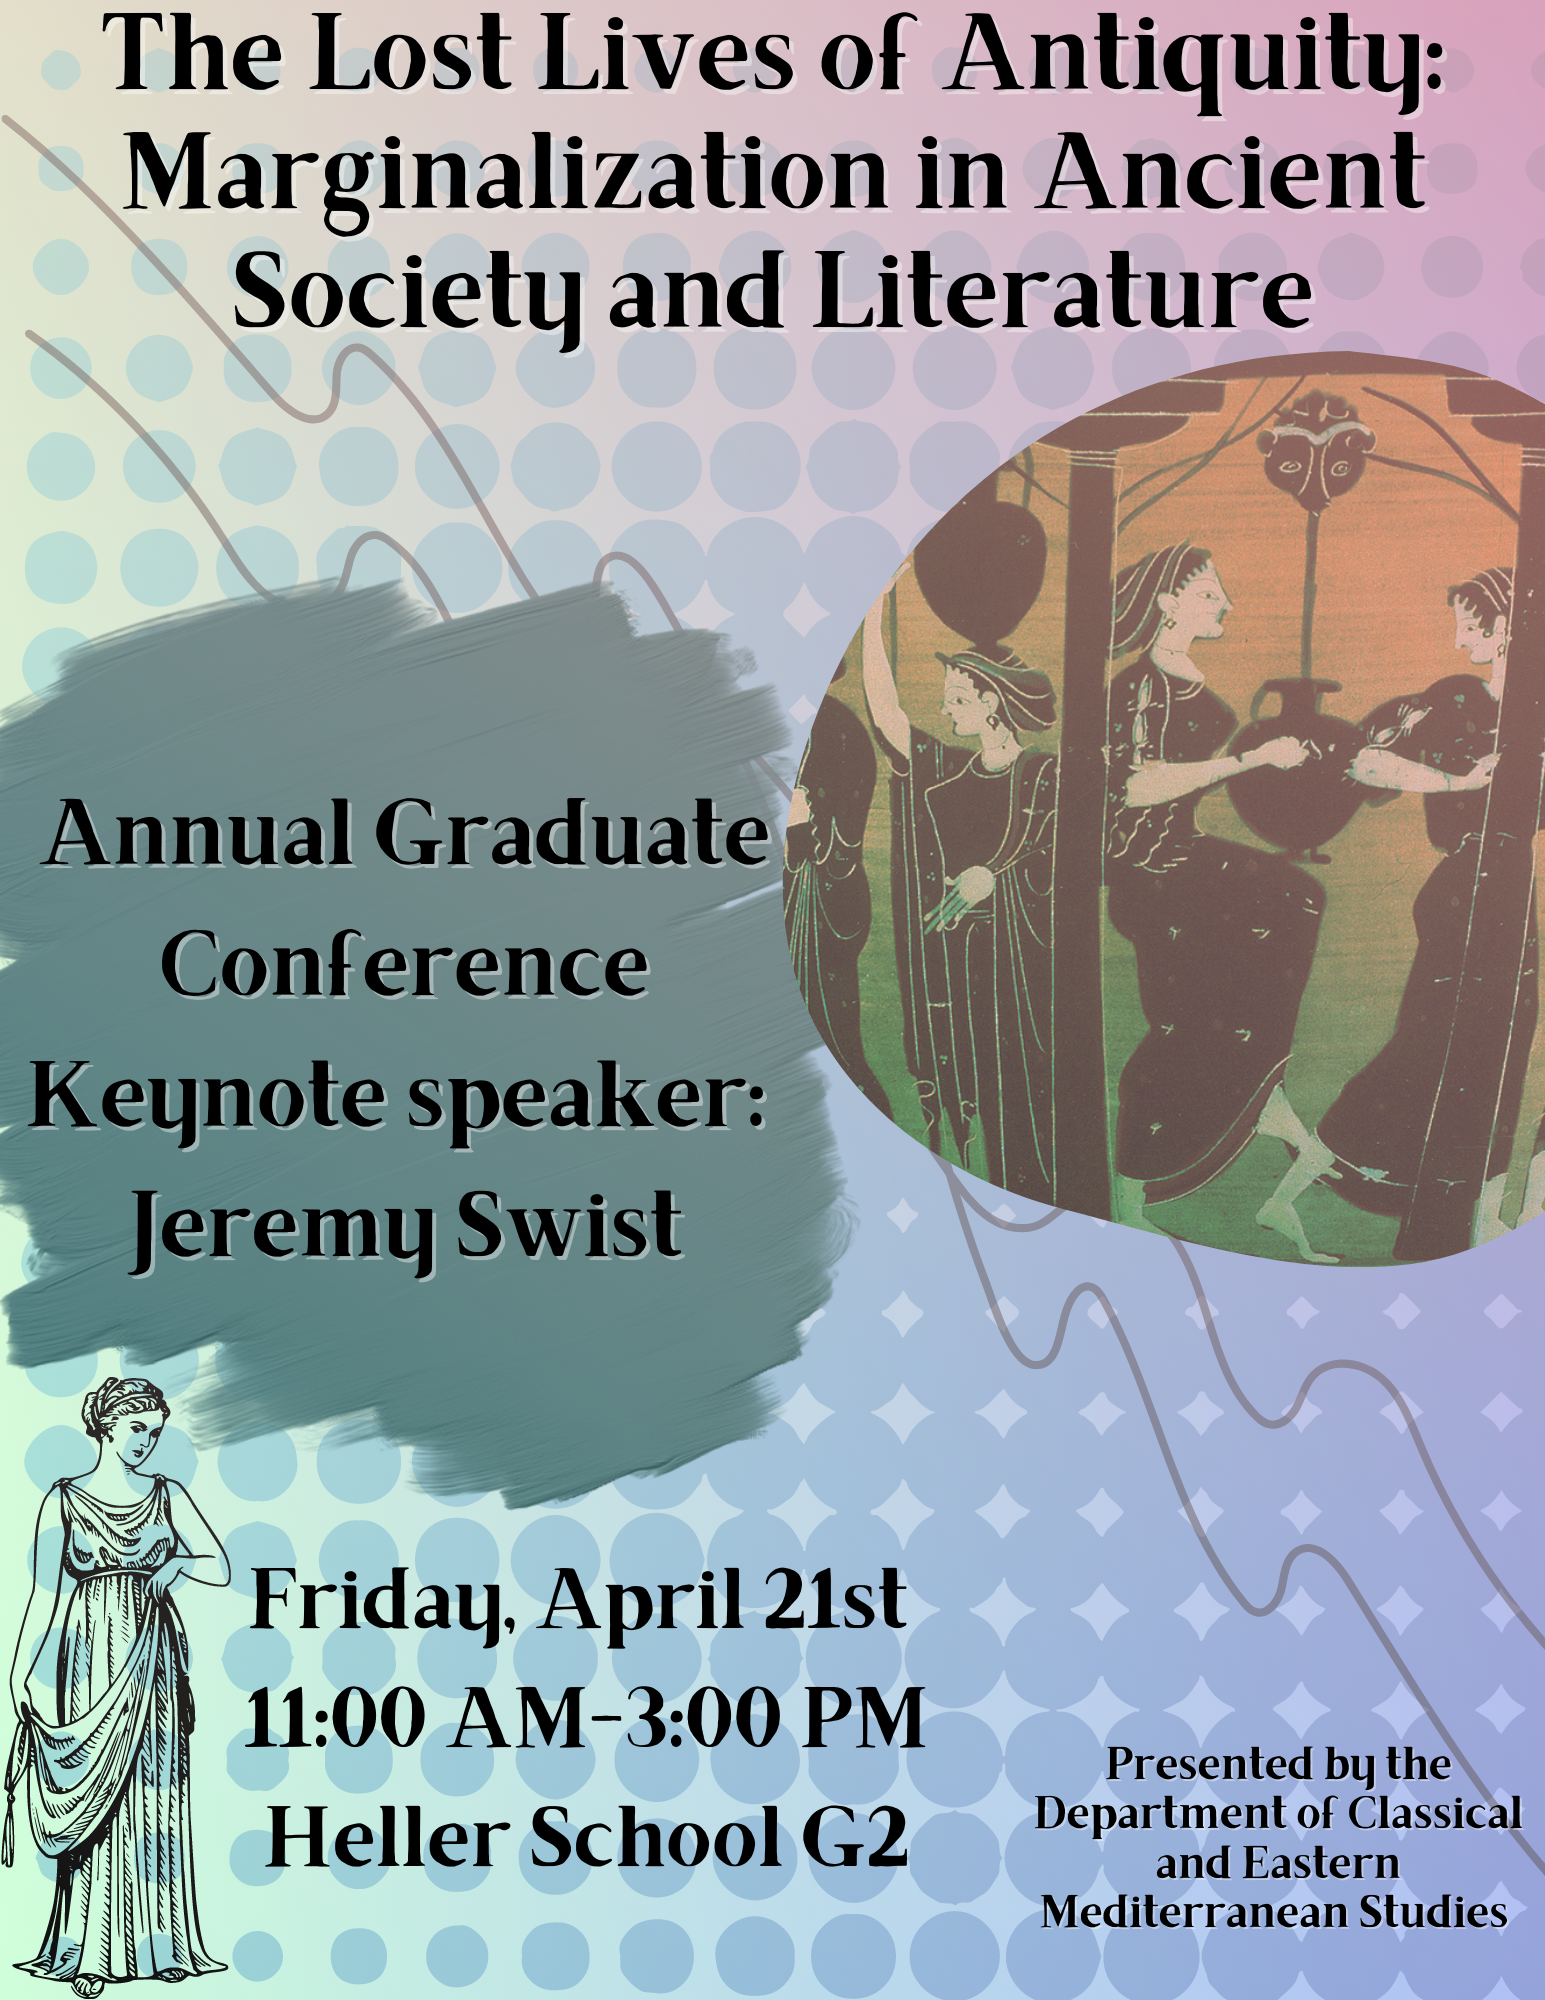 Annual Graduate Conference with Keynote Speaker Dr. Jeremy Swist. On Friday, April 21st from 11:00 AM to 3:00 PM in Heller School room G2.